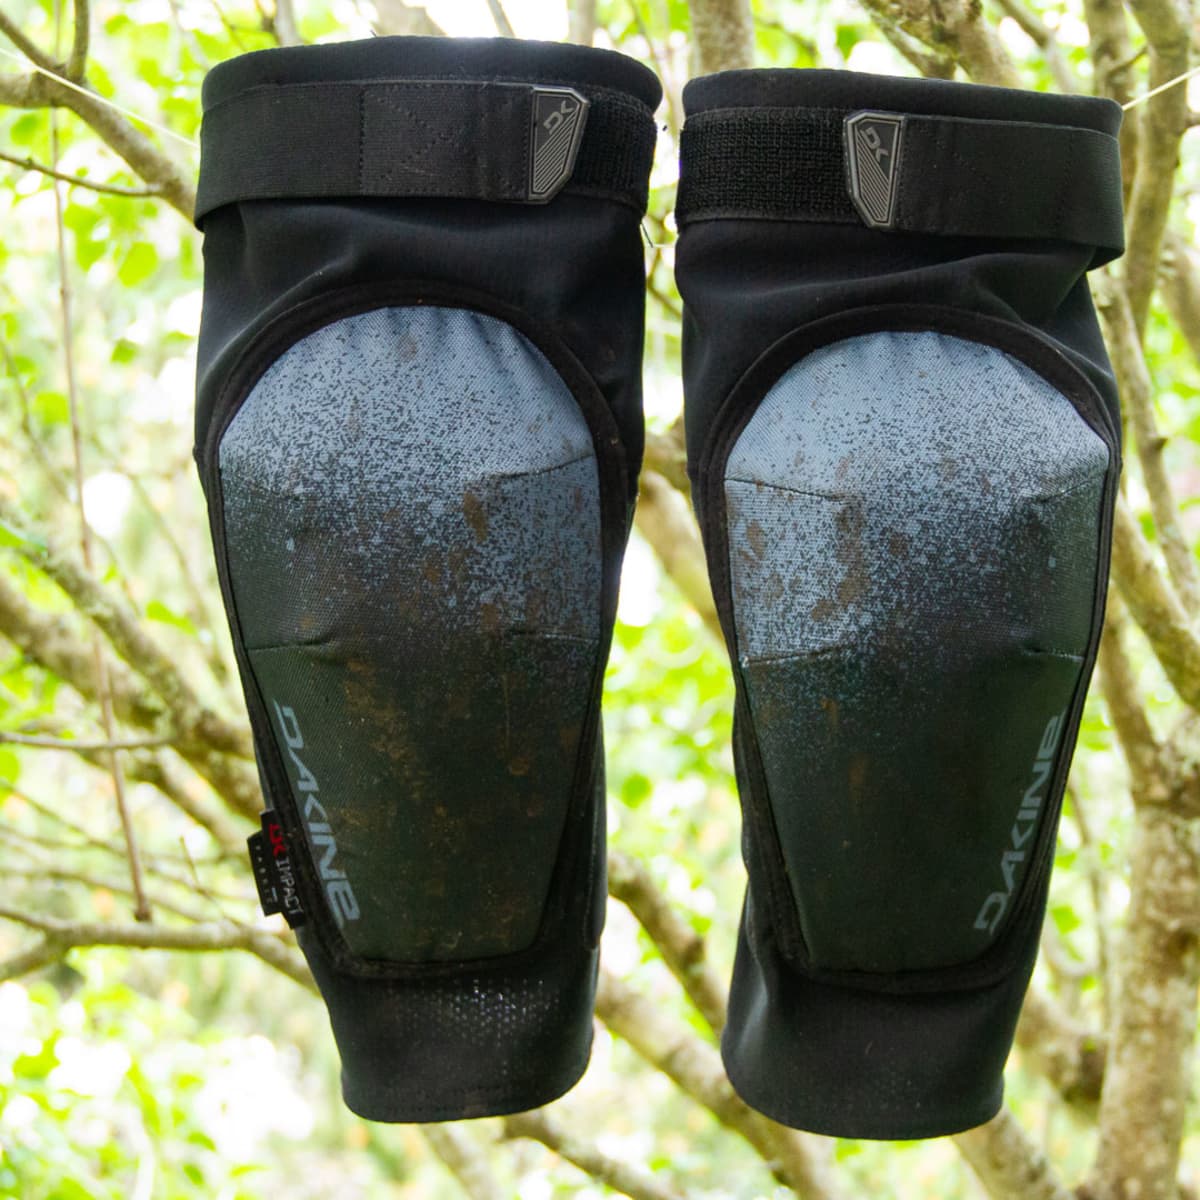 DIY built-in kneepads - Fuelly Forums